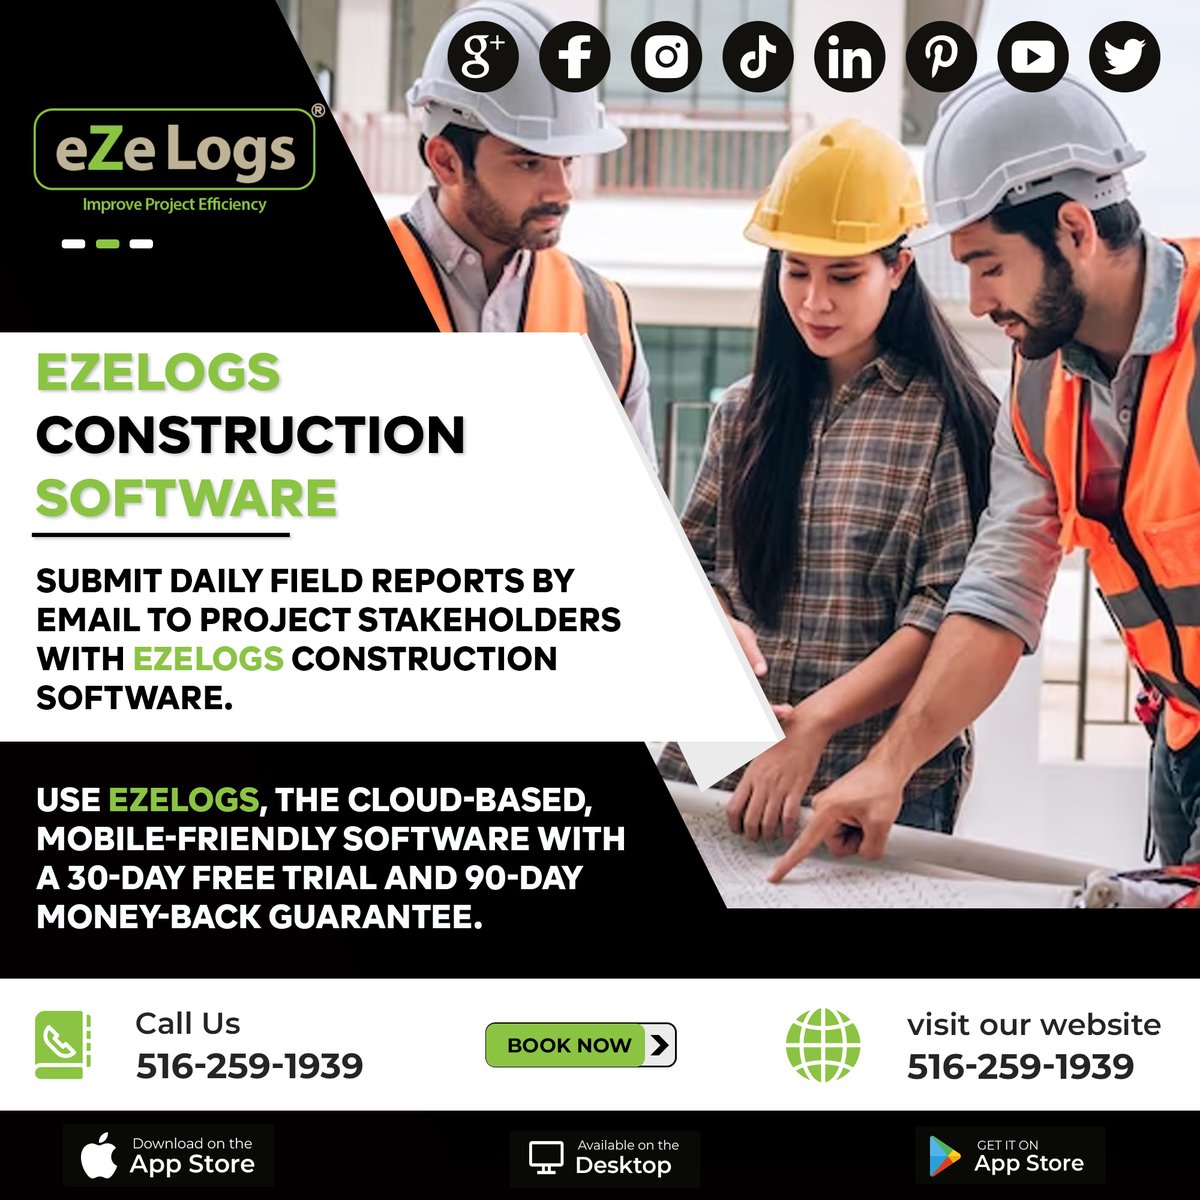 Stay connected and informed! With Ezelogs #construction #software, we're streamlining our daily field reports and keeping our #project stakeholders in the loop. From progress updates to on-site insights, we've got it covered. #ConstructionInnovation #Ezelogs